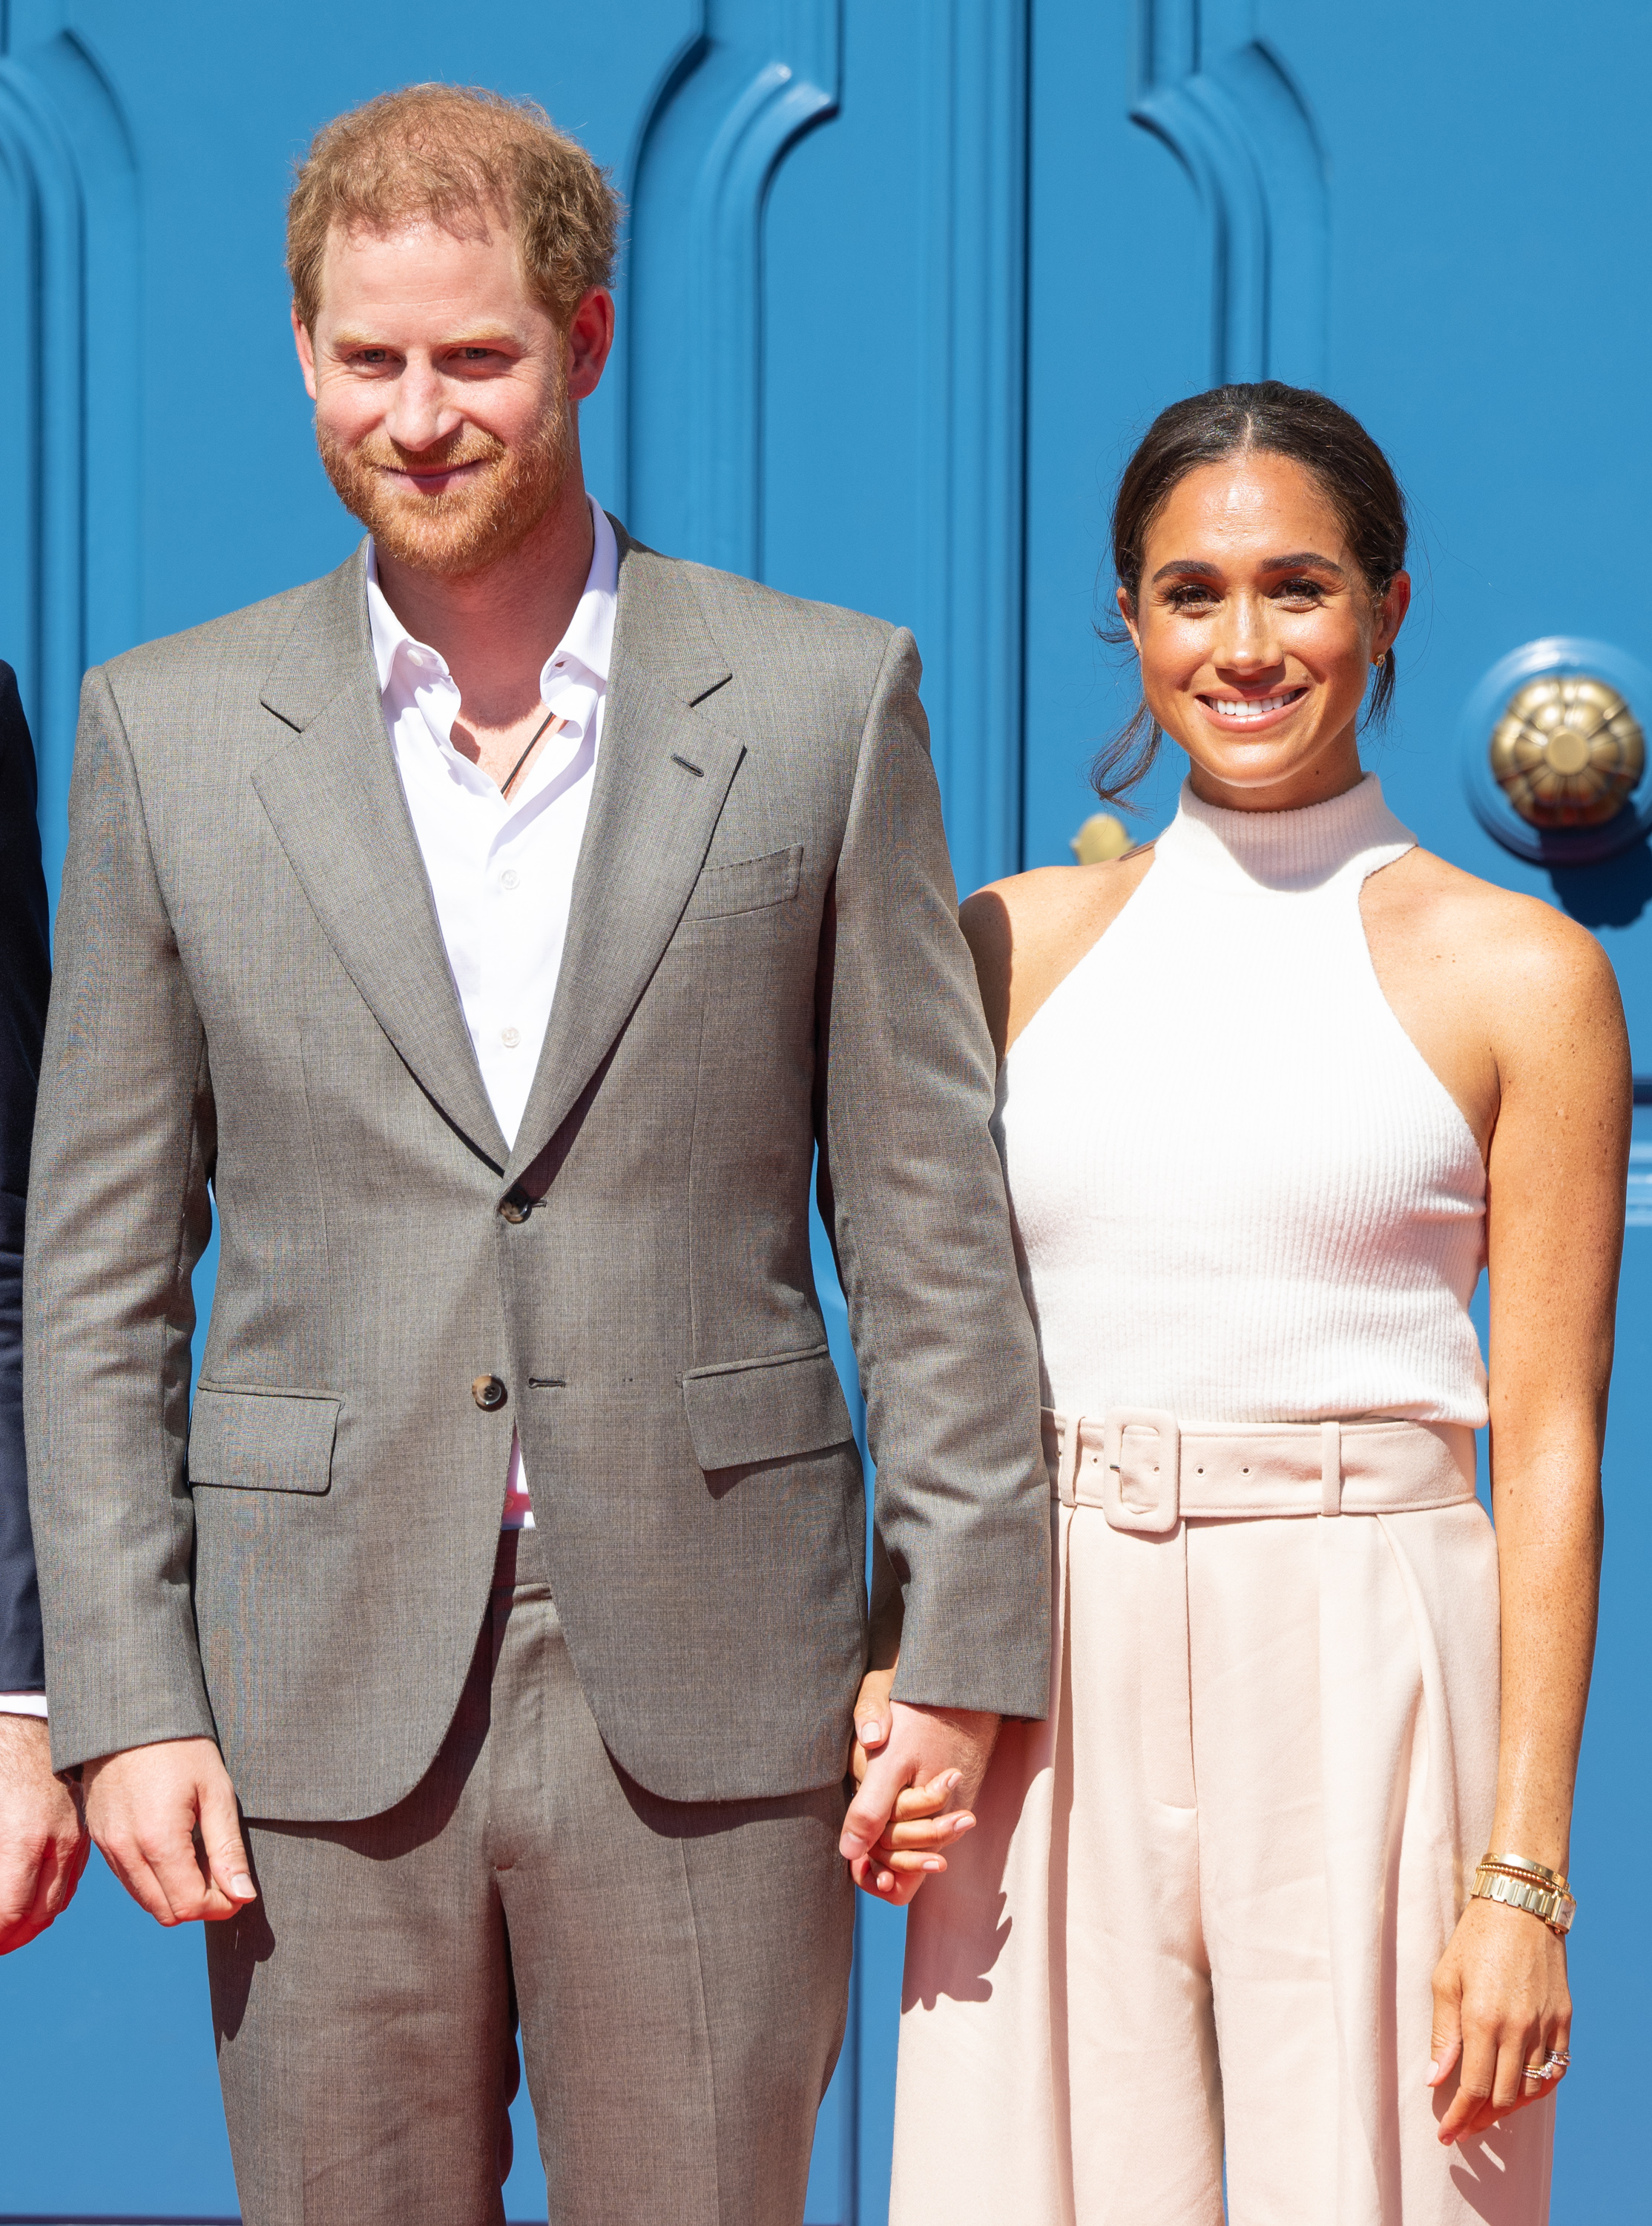 Prince Harry, Duke of Sussex, and Meghan Markle, Duchess of Sussex, in Dusseldorf, Germany, on September 06, 2022 | Source: Getty Images